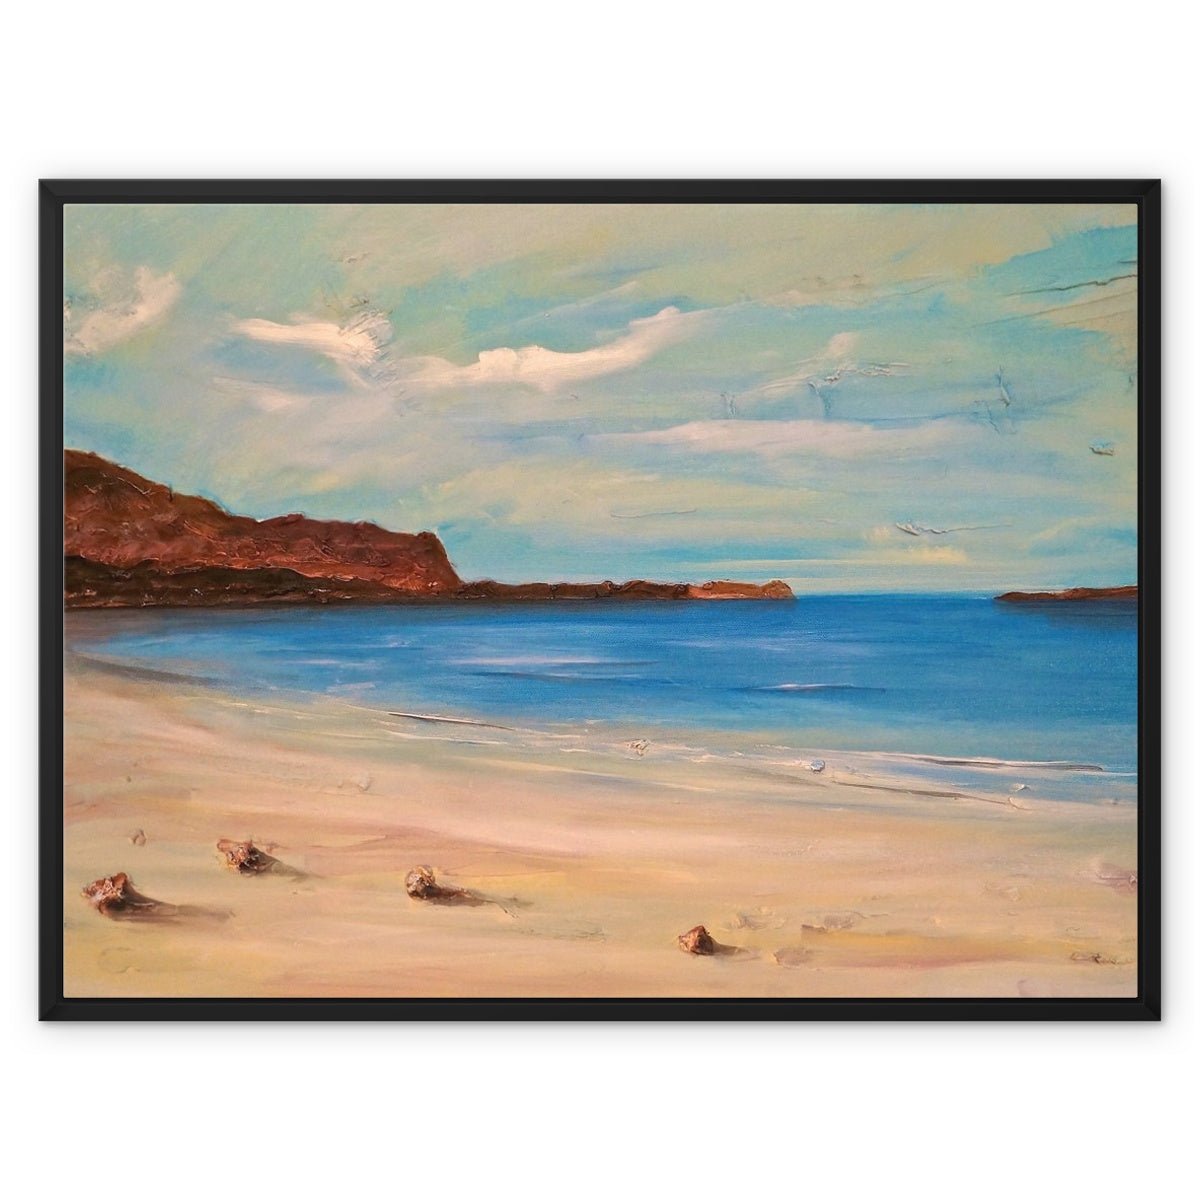 Bosta Beach Lewis Painting | Framed Canvas-Floating Framed Canvas Prints-Hebridean Islands Art Gallery-32"x24"-Black Frame-Paintings, Prints, Homeware, Art Gifts From Scotland By Scottish Artist Kevin Hunter